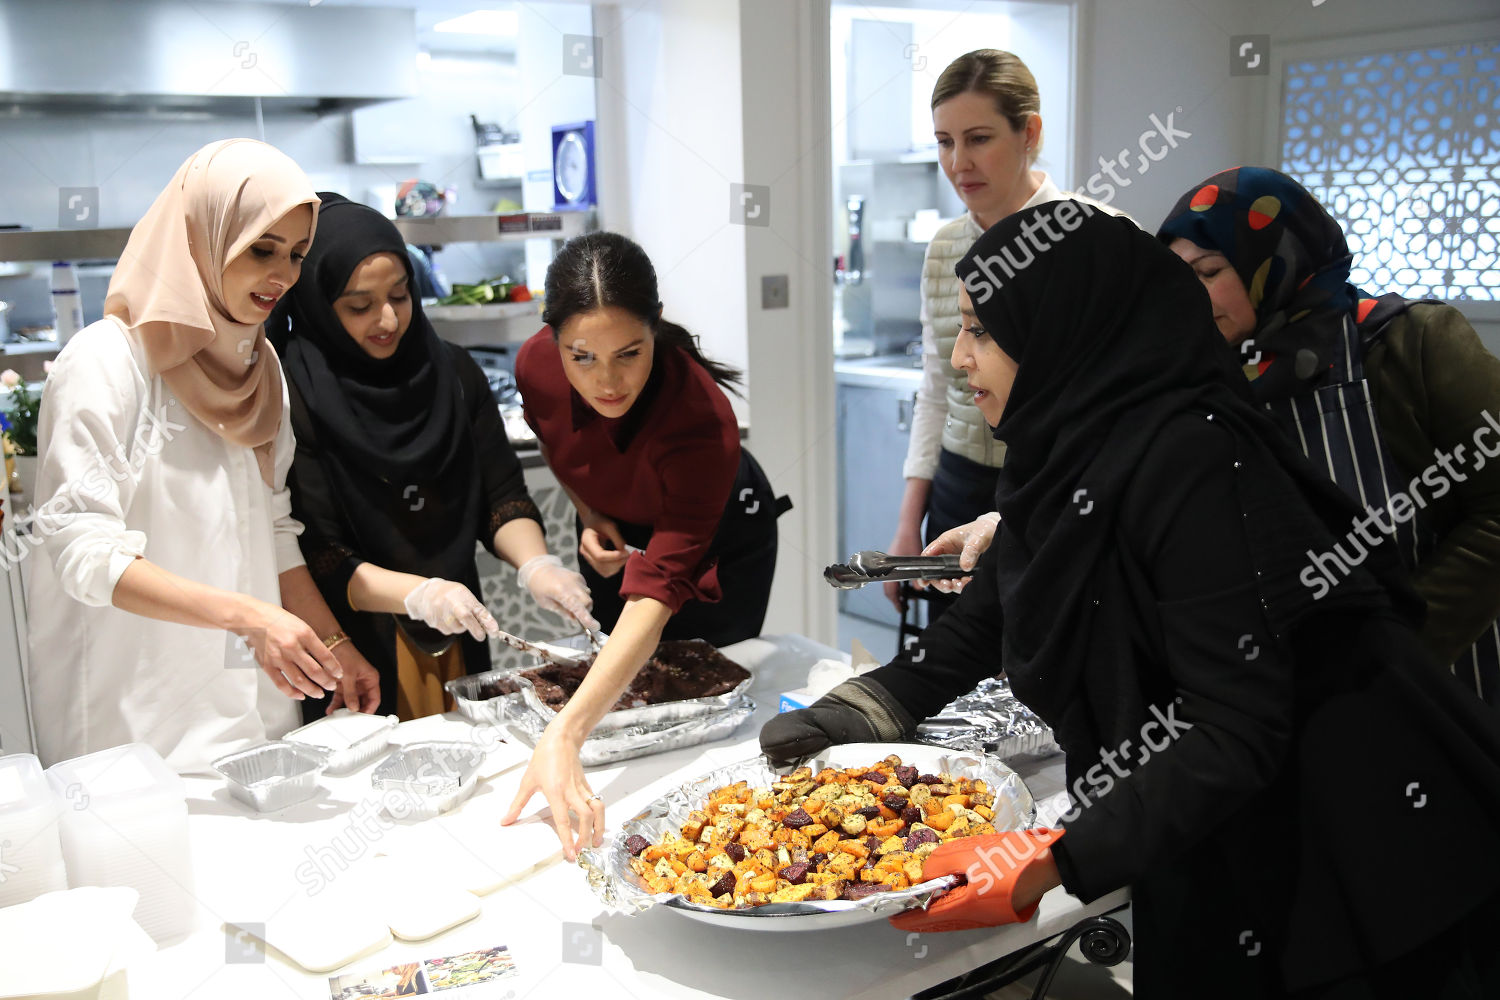 meghan-duchess-of-sussex-visit-to-the-hubb-community-kitchen-london-uk-shutterstock-editorial-9988987y.jpg